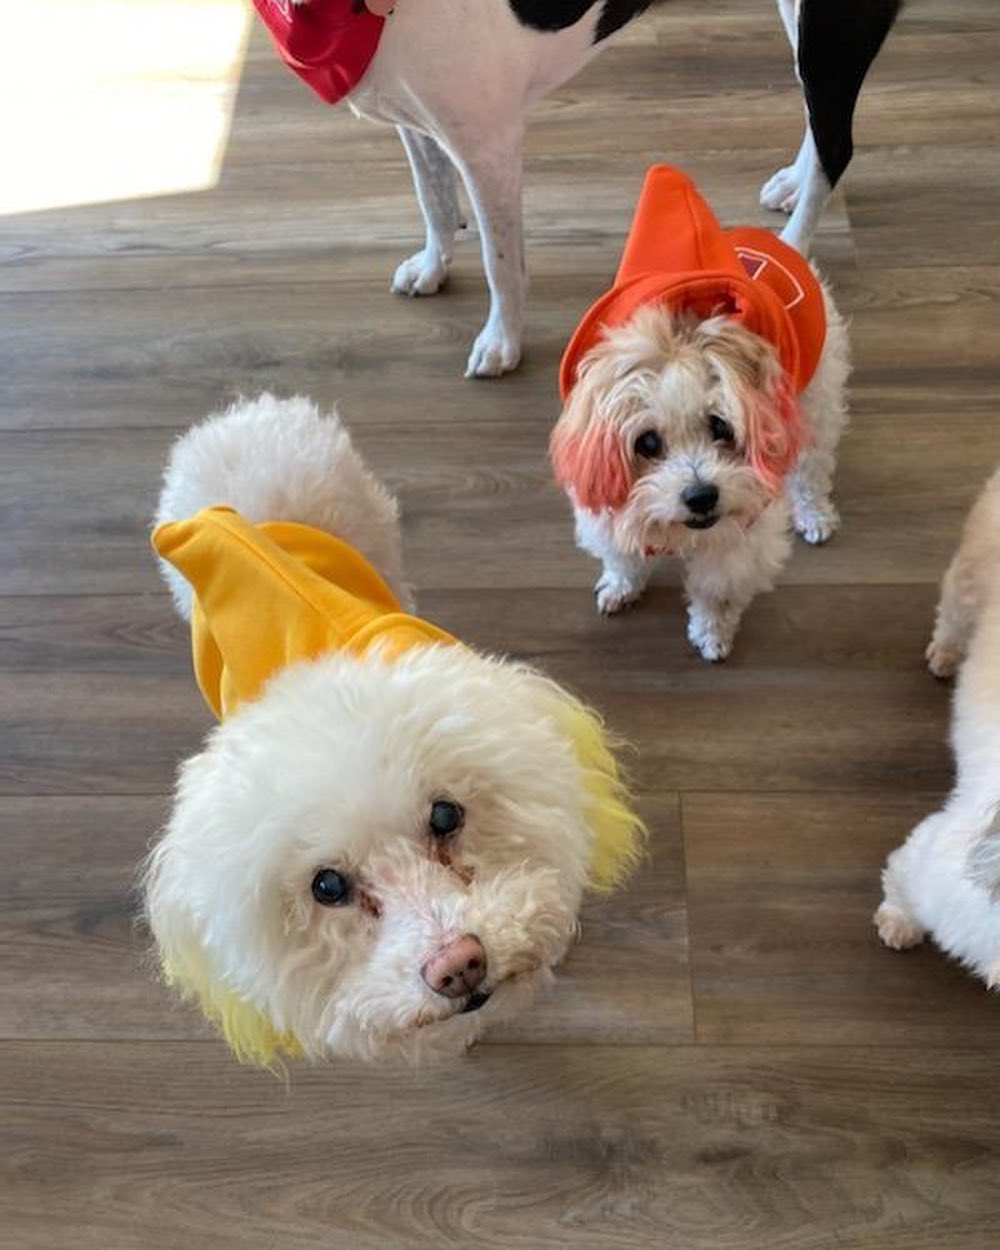 That 🌭 is none other than BRB Foster Fail @vieveland with her beautiful pack of senior girls… Samantha, Kiwi and April (ketchup, popcorn and mustard ). They were at @topdogbarkery HOWL’oween pawty 🎃🕸👻 @vieveland and Kiwi adopted bonded senior girls April and Samantha when their previous owner was no longer to keep them.  <a target='_blank' href='https://www.instagram.com/explore/tags/fosterfail/'>#fosterfail</a><a target='_blank' href='https://www.instagram.com/explore/tags/fosteringsaveslives/'>#fosteringsaveslives</a><a target='_blank' href='https://www.instagram.com/explore/tags/makeadifference/'>#makeadifference</a><a target='_blank' href='https://www.instagram.com/explore/tags/seniordogsofinstagram/'>#seniordogsofinstagram</a><a target='_blank' href='https://www.instagram.com/explore/tags/dailyfluff/'>#dailyfluff</a> <a target='_blank' href='https://www.instagram.com/explore/tags/halloween/'>#halloween</a><a target='_blank' href='https://www.instagram.com/explore/tags/adopt/'>#adopt</a><a target='_blank' href='https://www.instagram.com/explore/tags/rescuedogs/'>#rescuedogs</a>